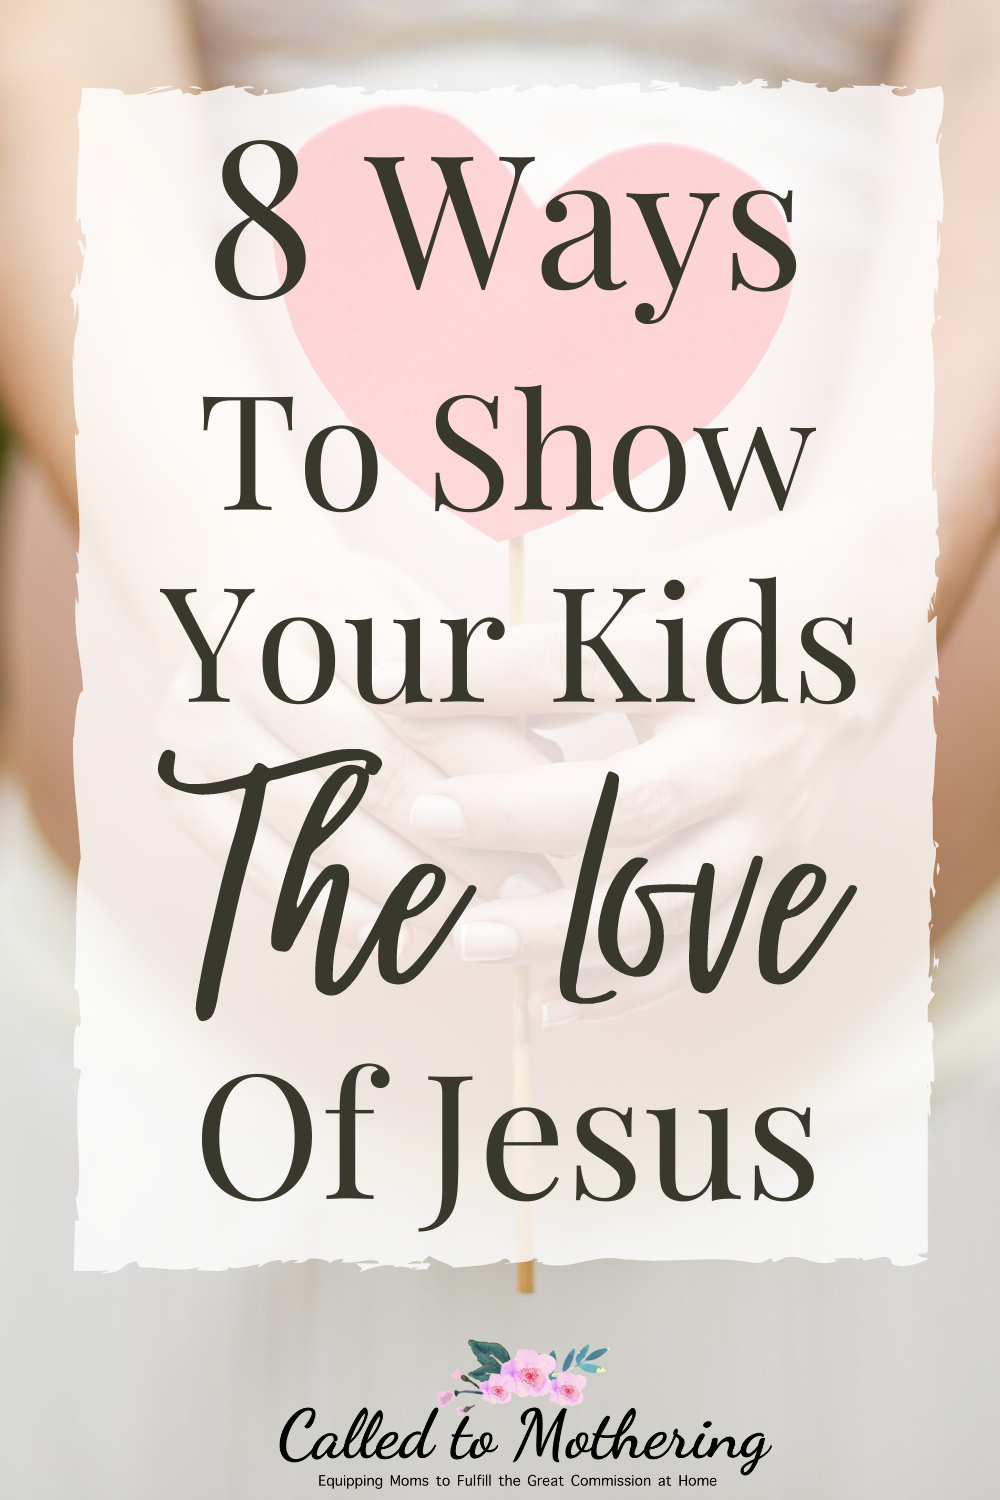 One of the best ways to lead our children to Christ is by imitating His example. Here are 8 things you can do to love your kids the way Jesus does! #christianparenting #raisinggodlykids